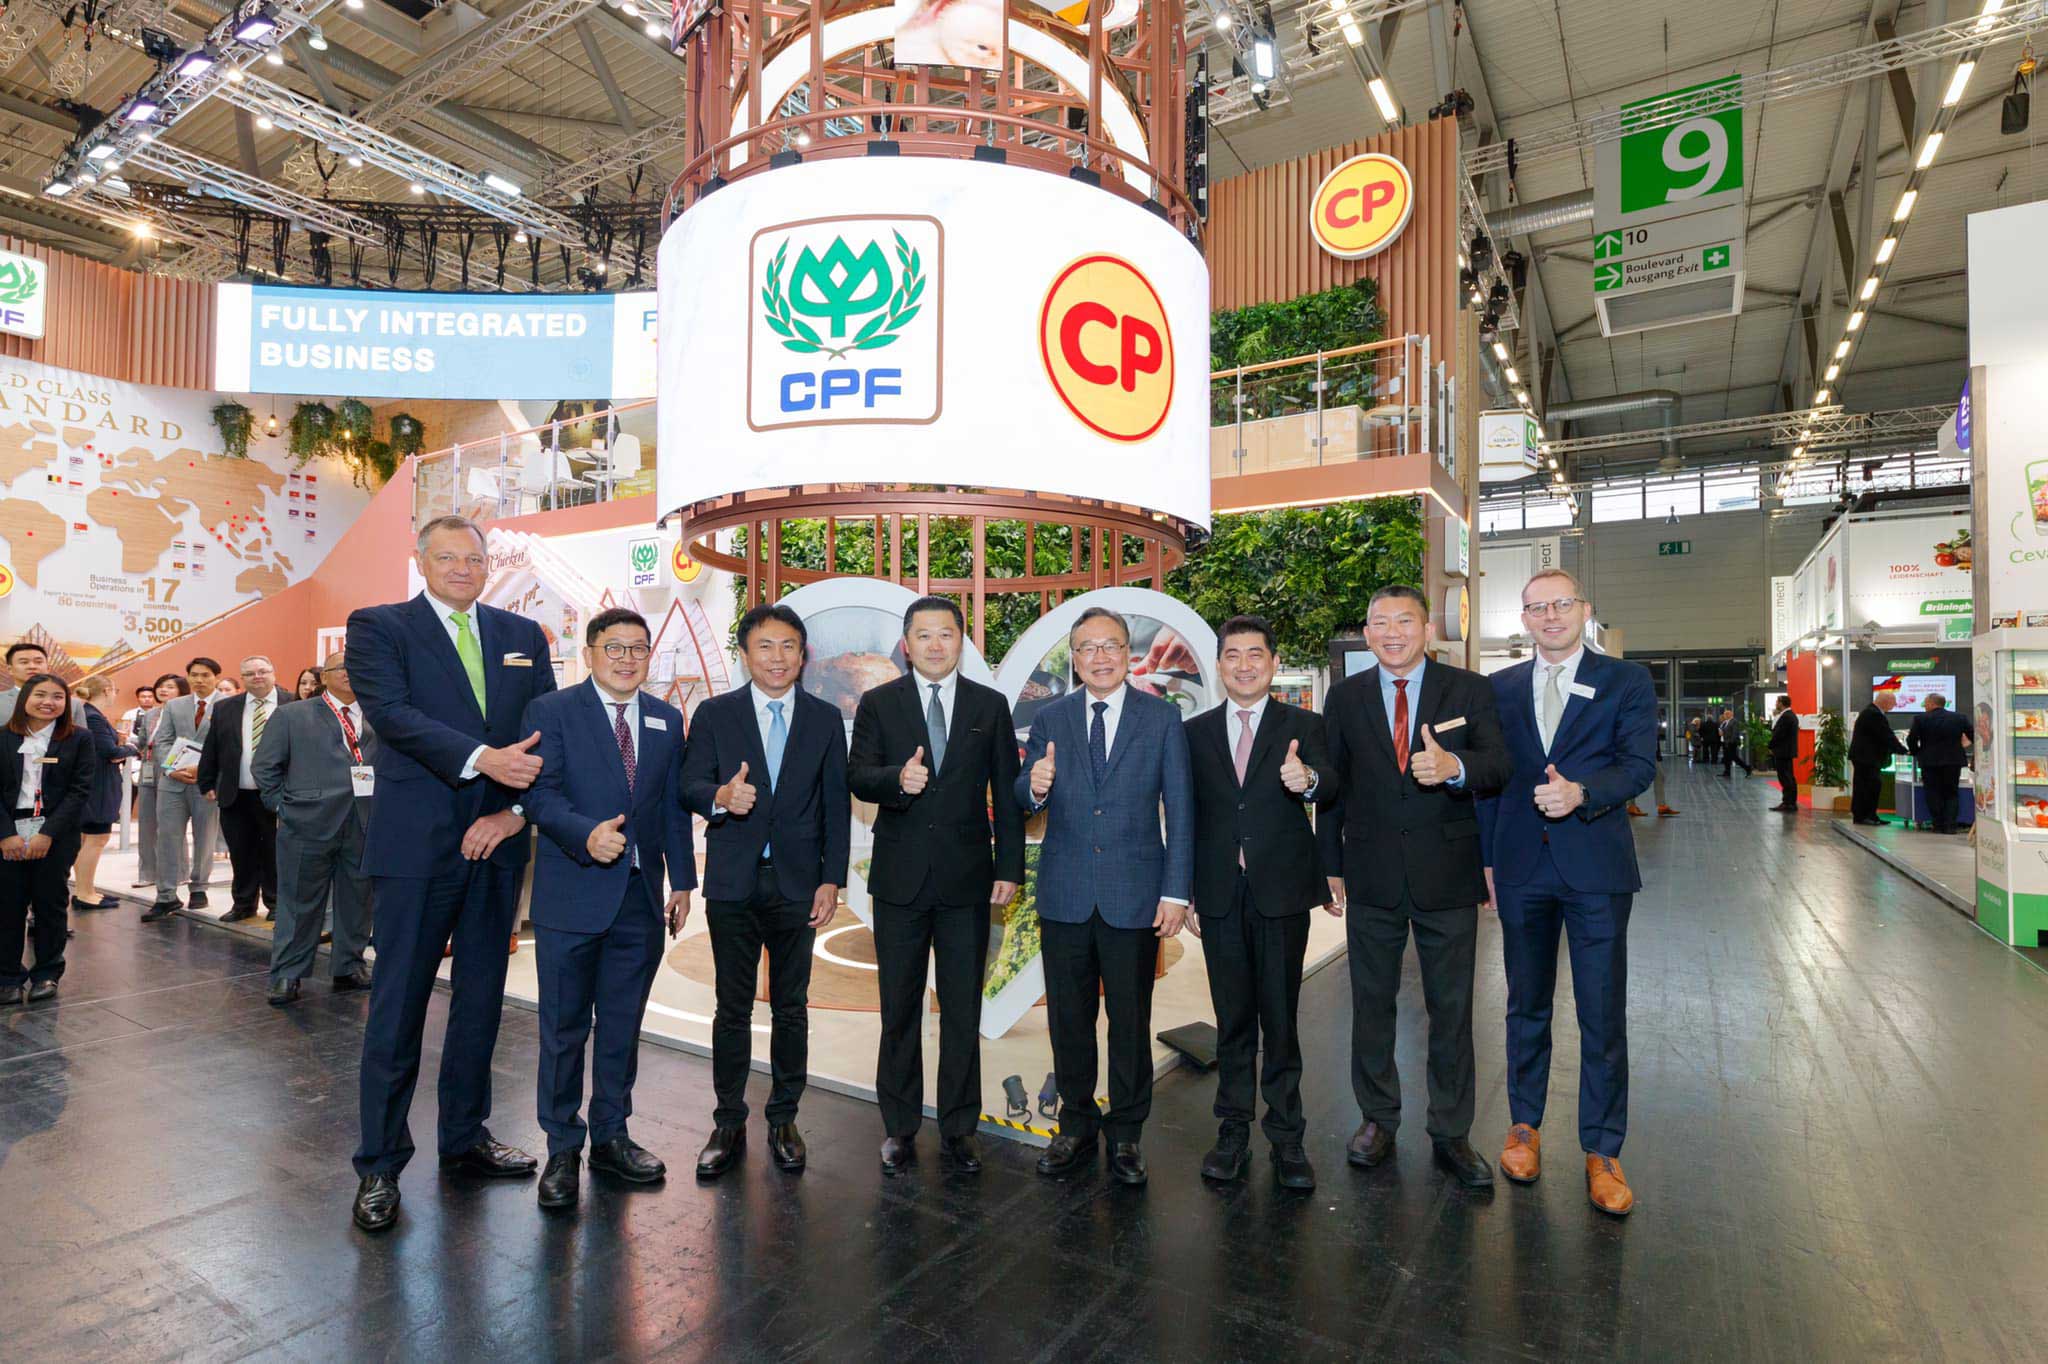 CPF Chairman visited CPF booth displaying "Kitchen of the world" at Anuga 2019.